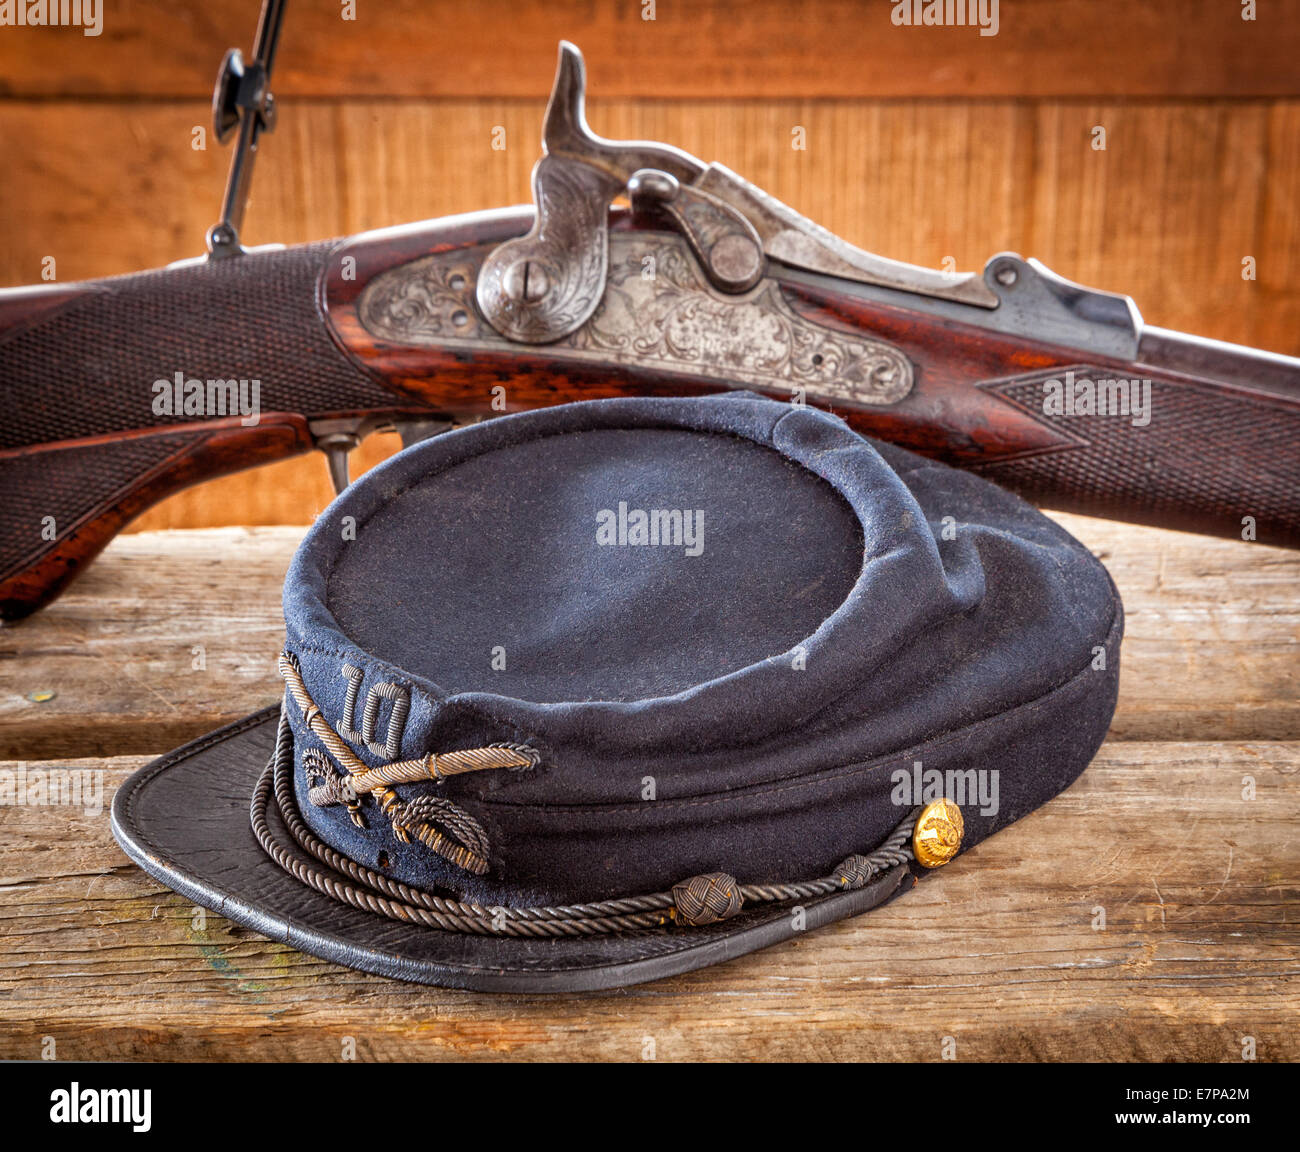 US Army soldier's cap with rifle Stock Photo